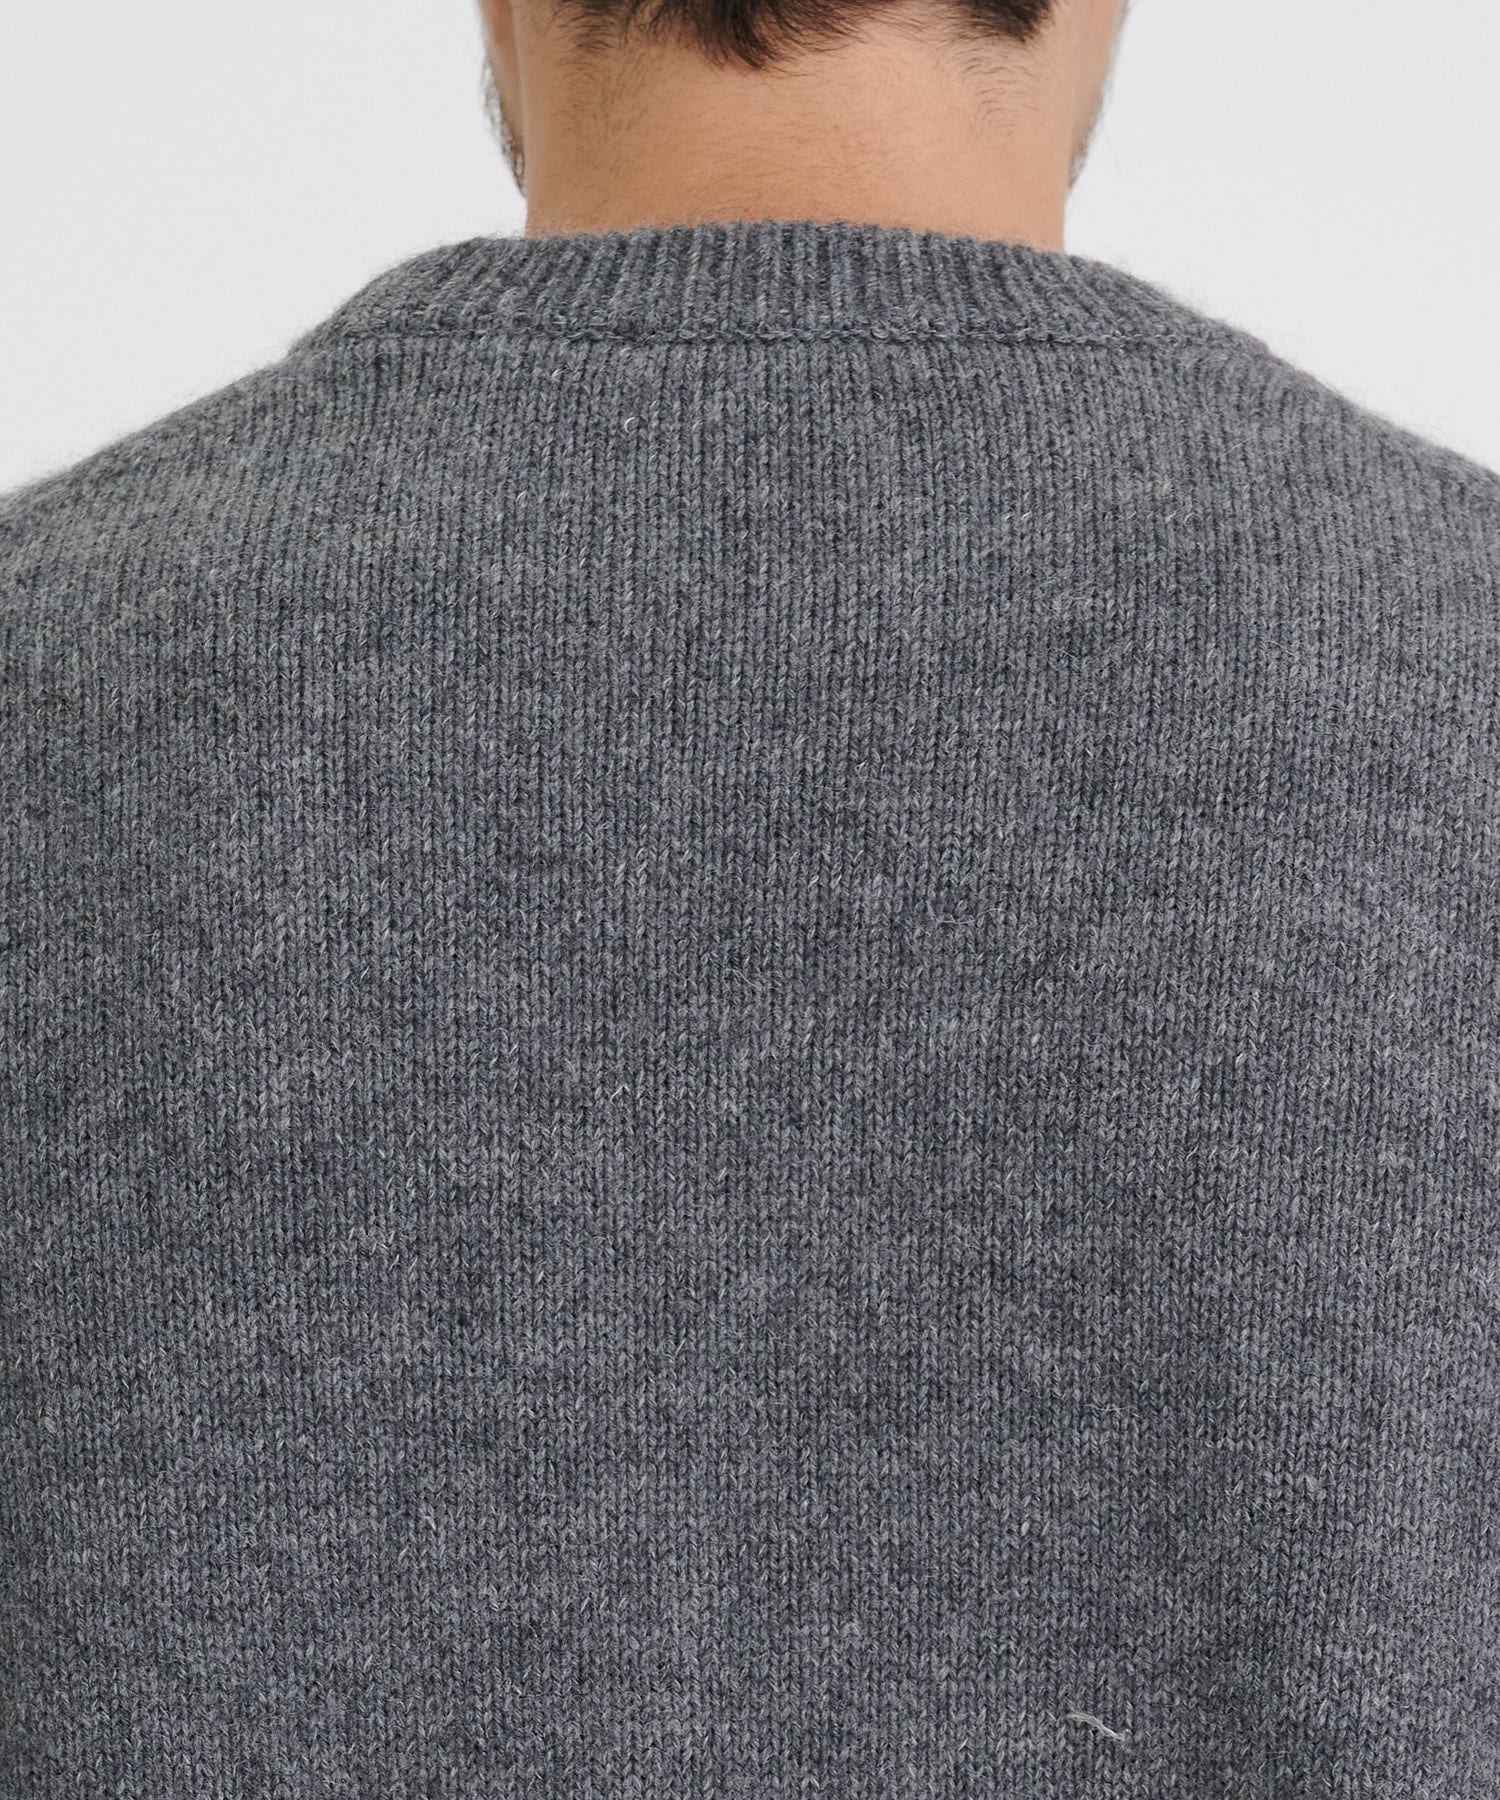 EX. COOMA LAMBS WOOL KNIT PO ｜ ATON